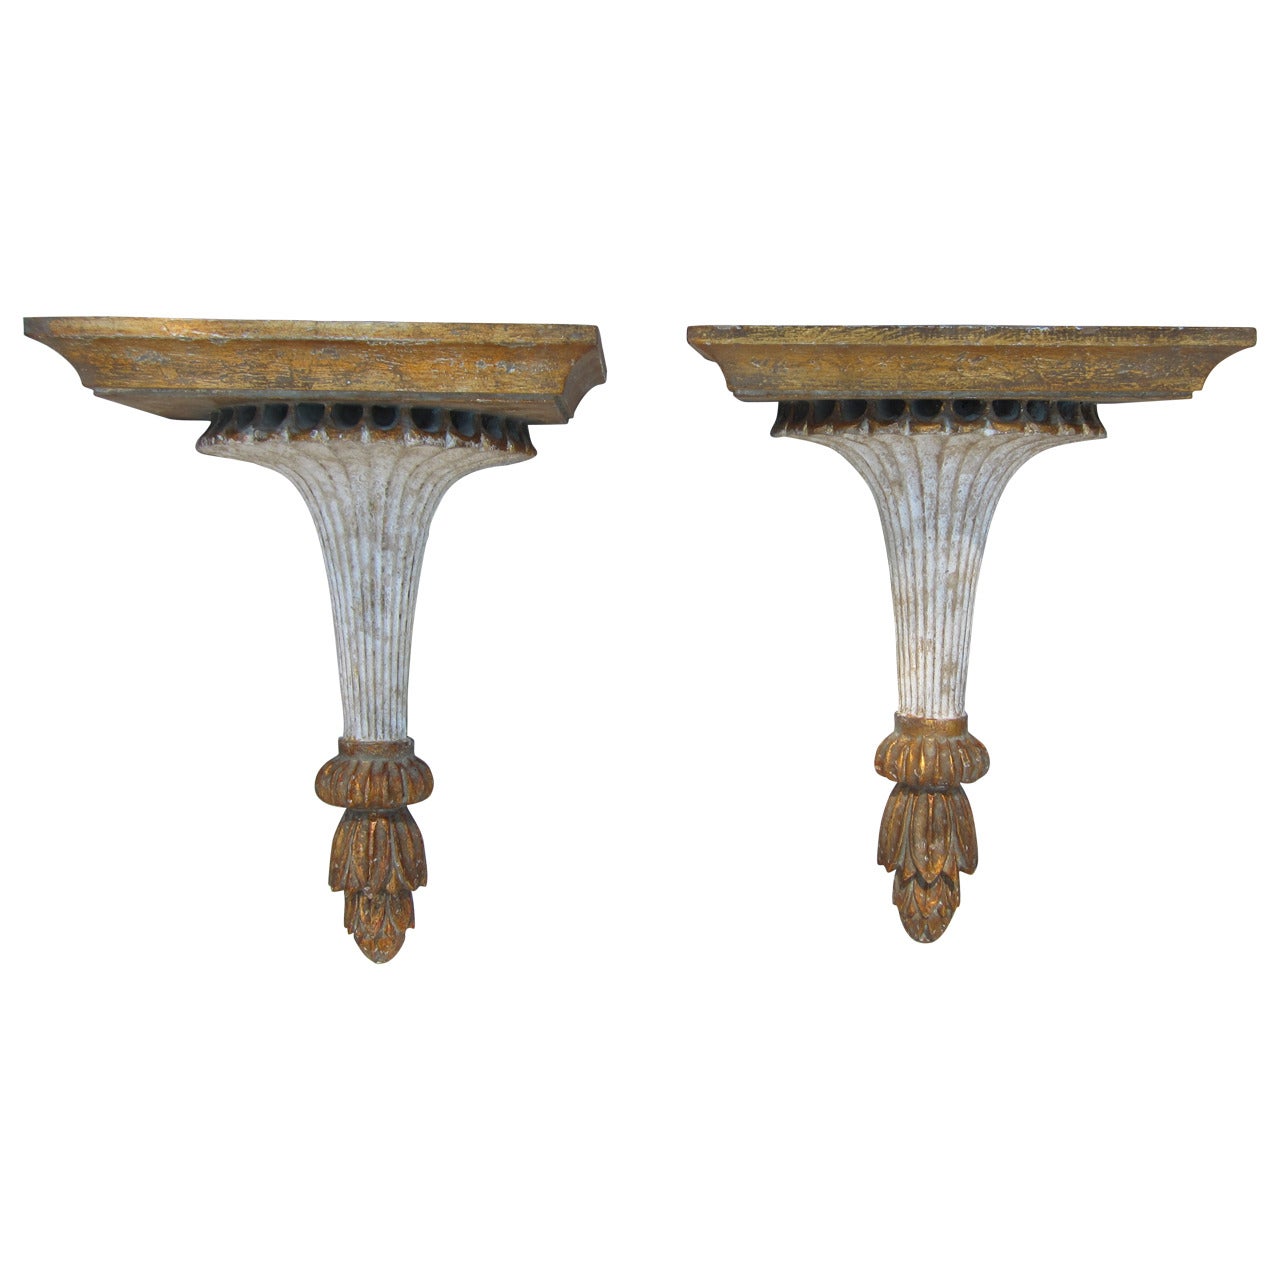 Pair of Painted and Gilt Wall Brackets